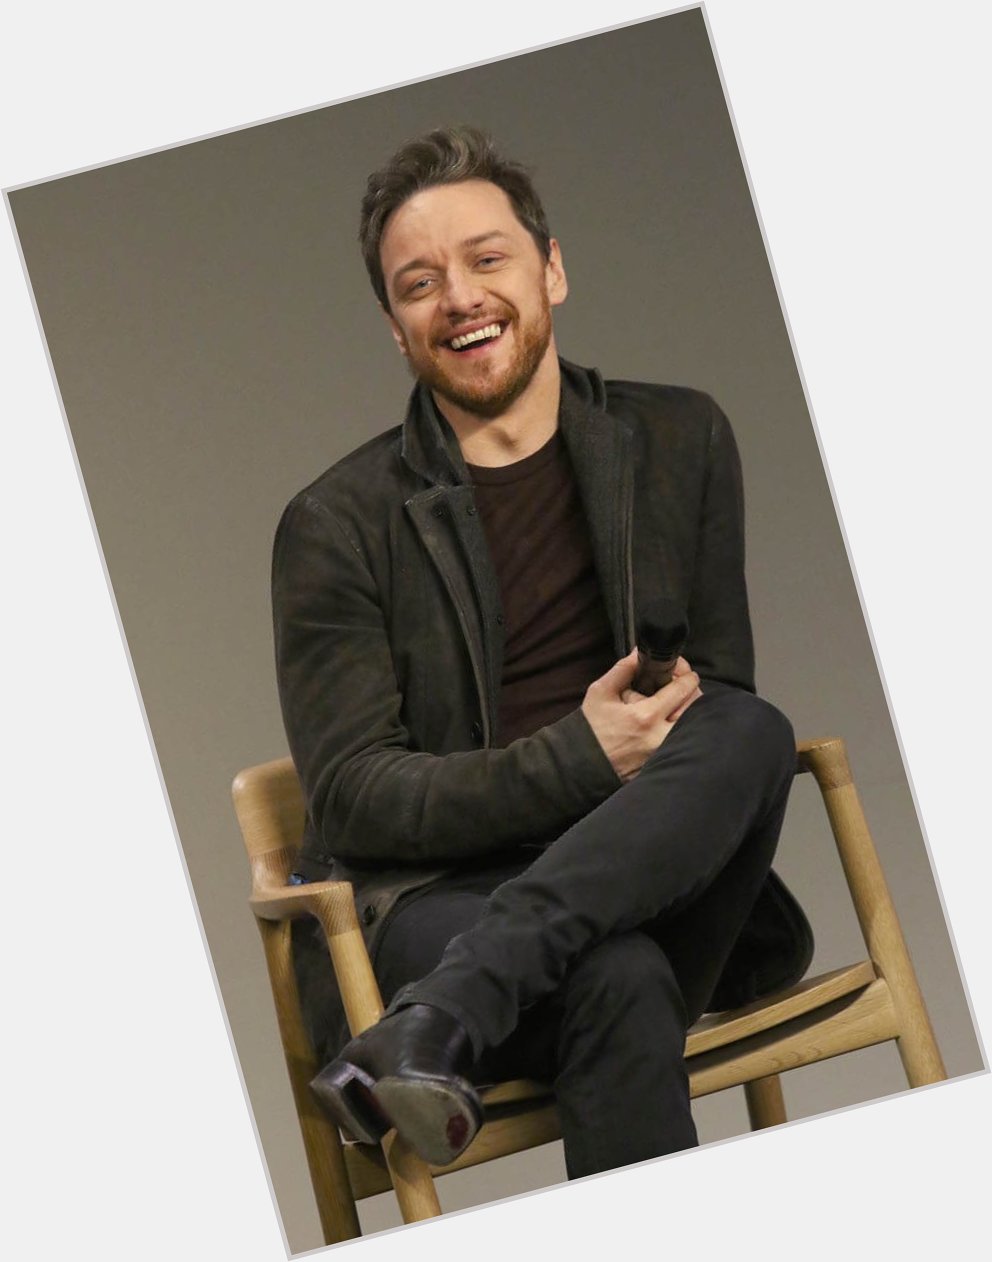 Happy Birthday James McAvoy, one of the best actors working today. 